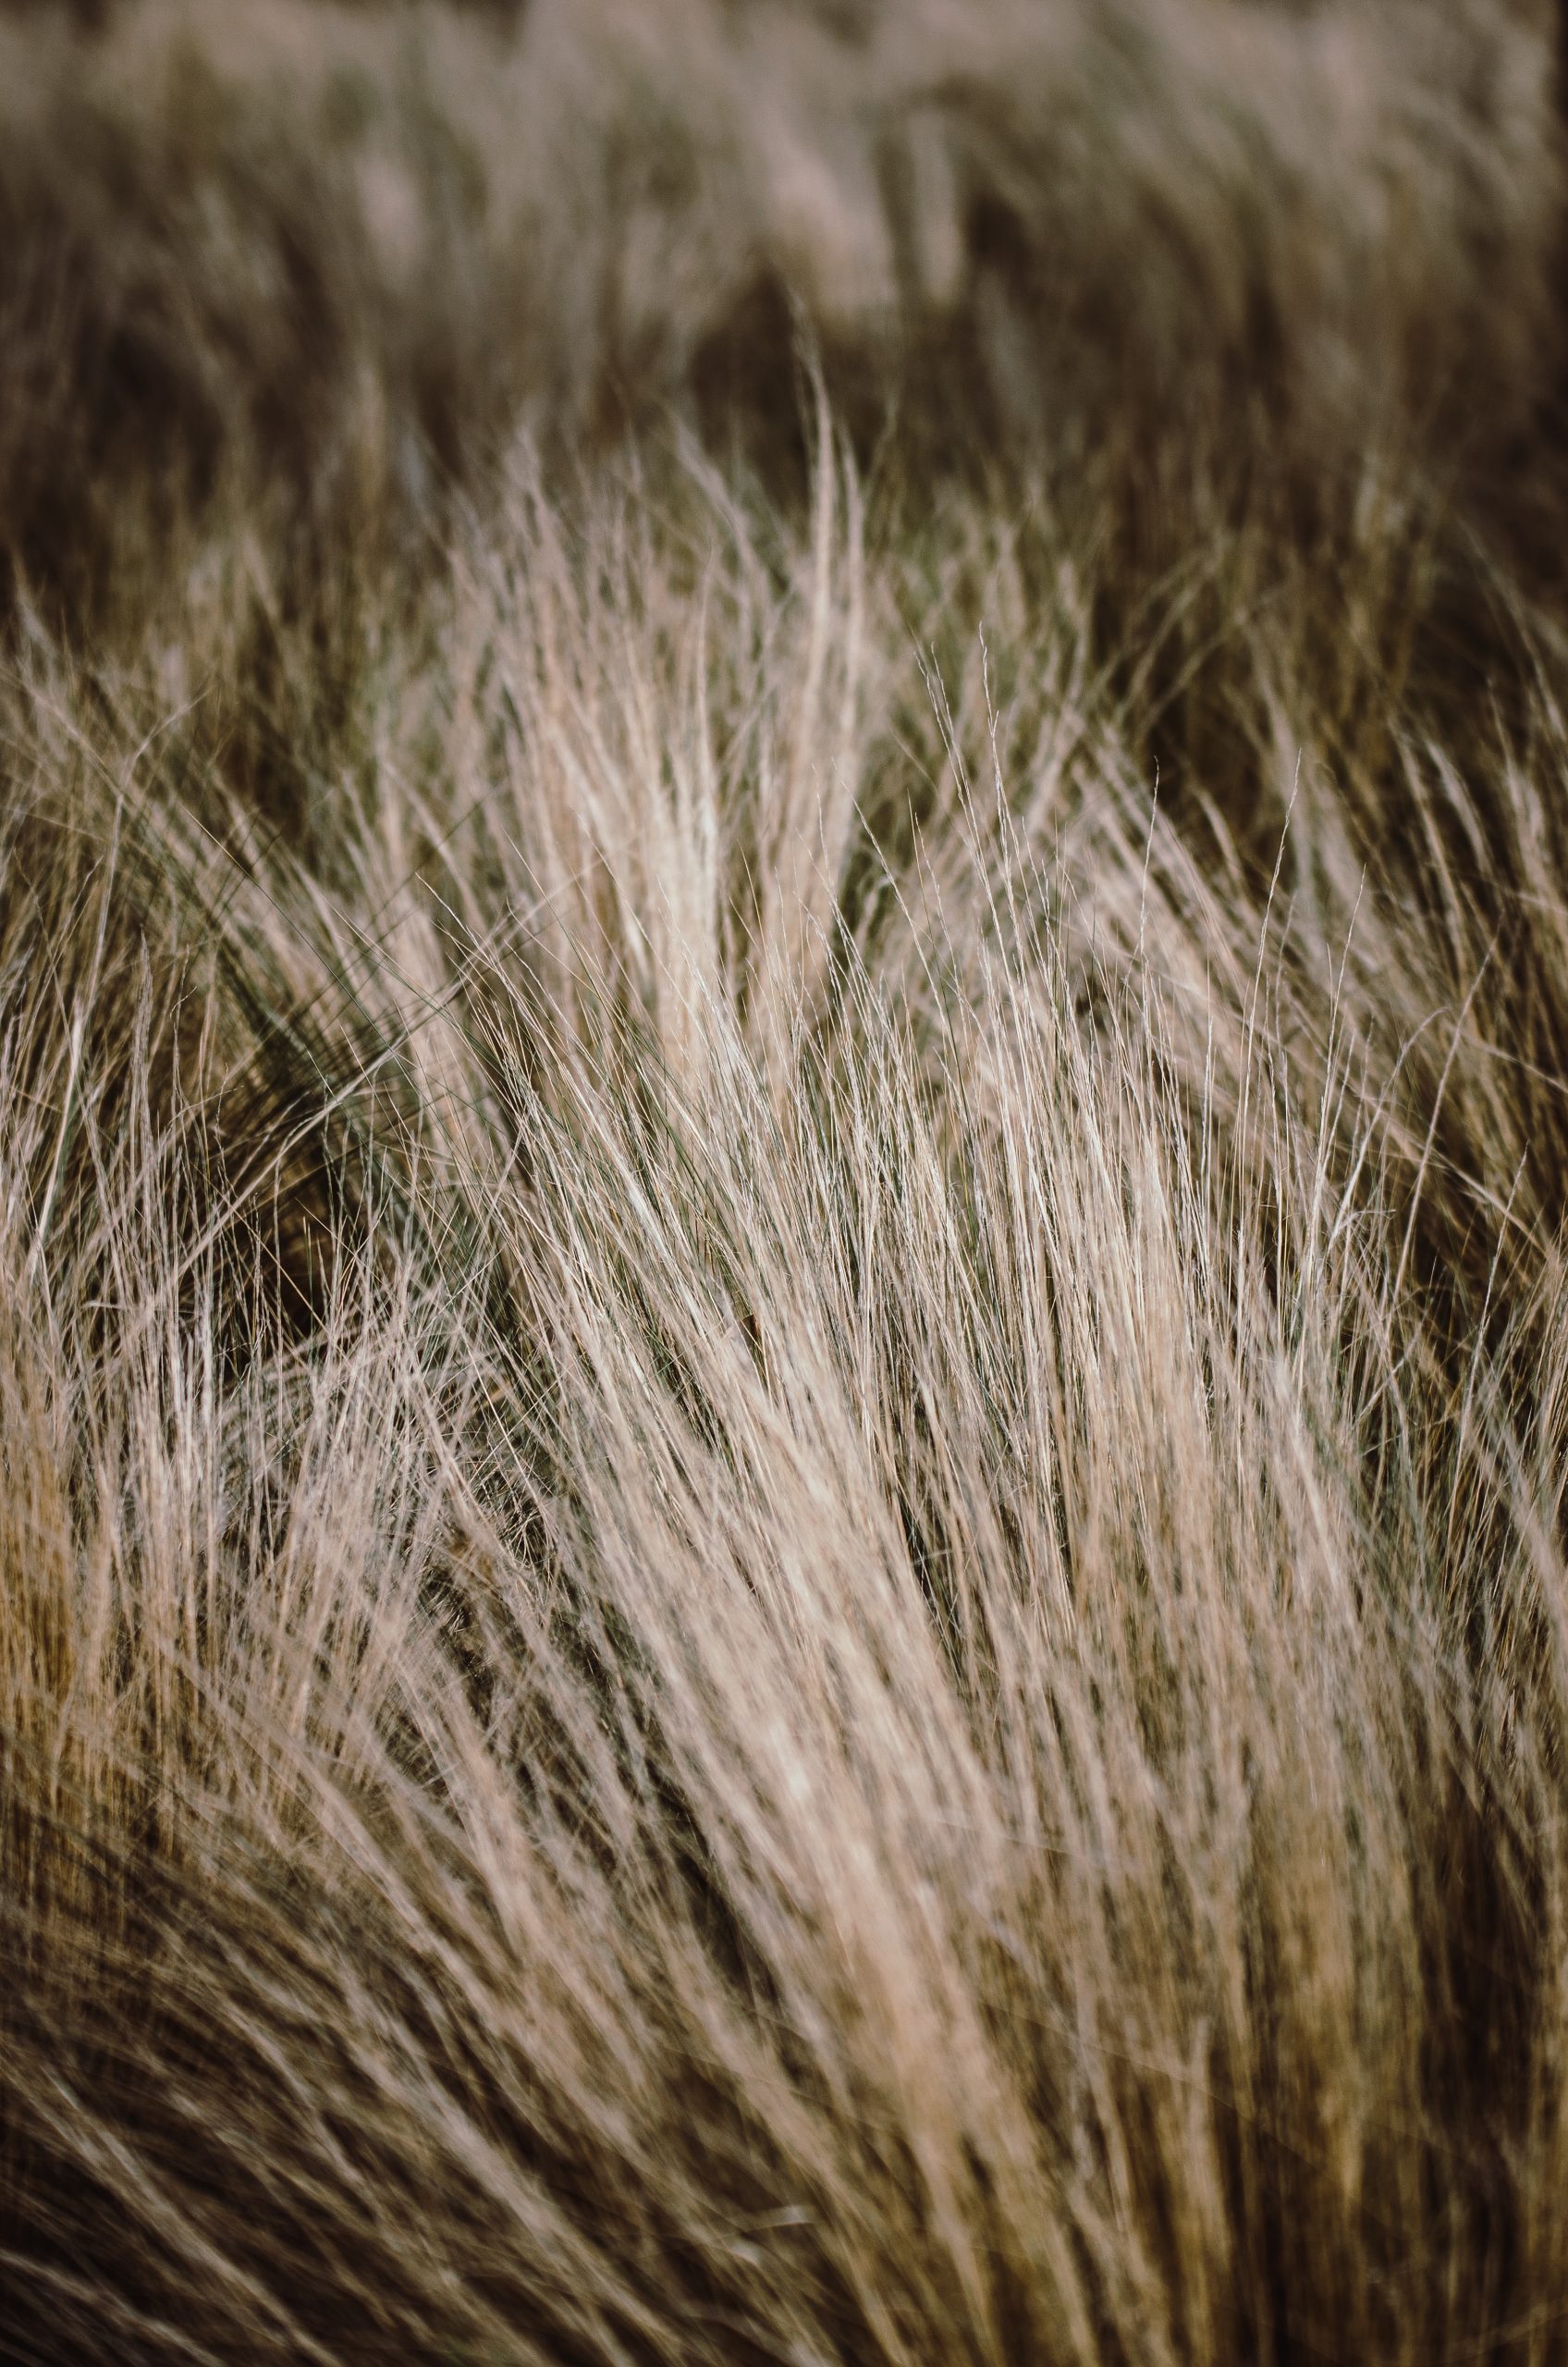 A close-up photograph of long brown grass in an empty field.